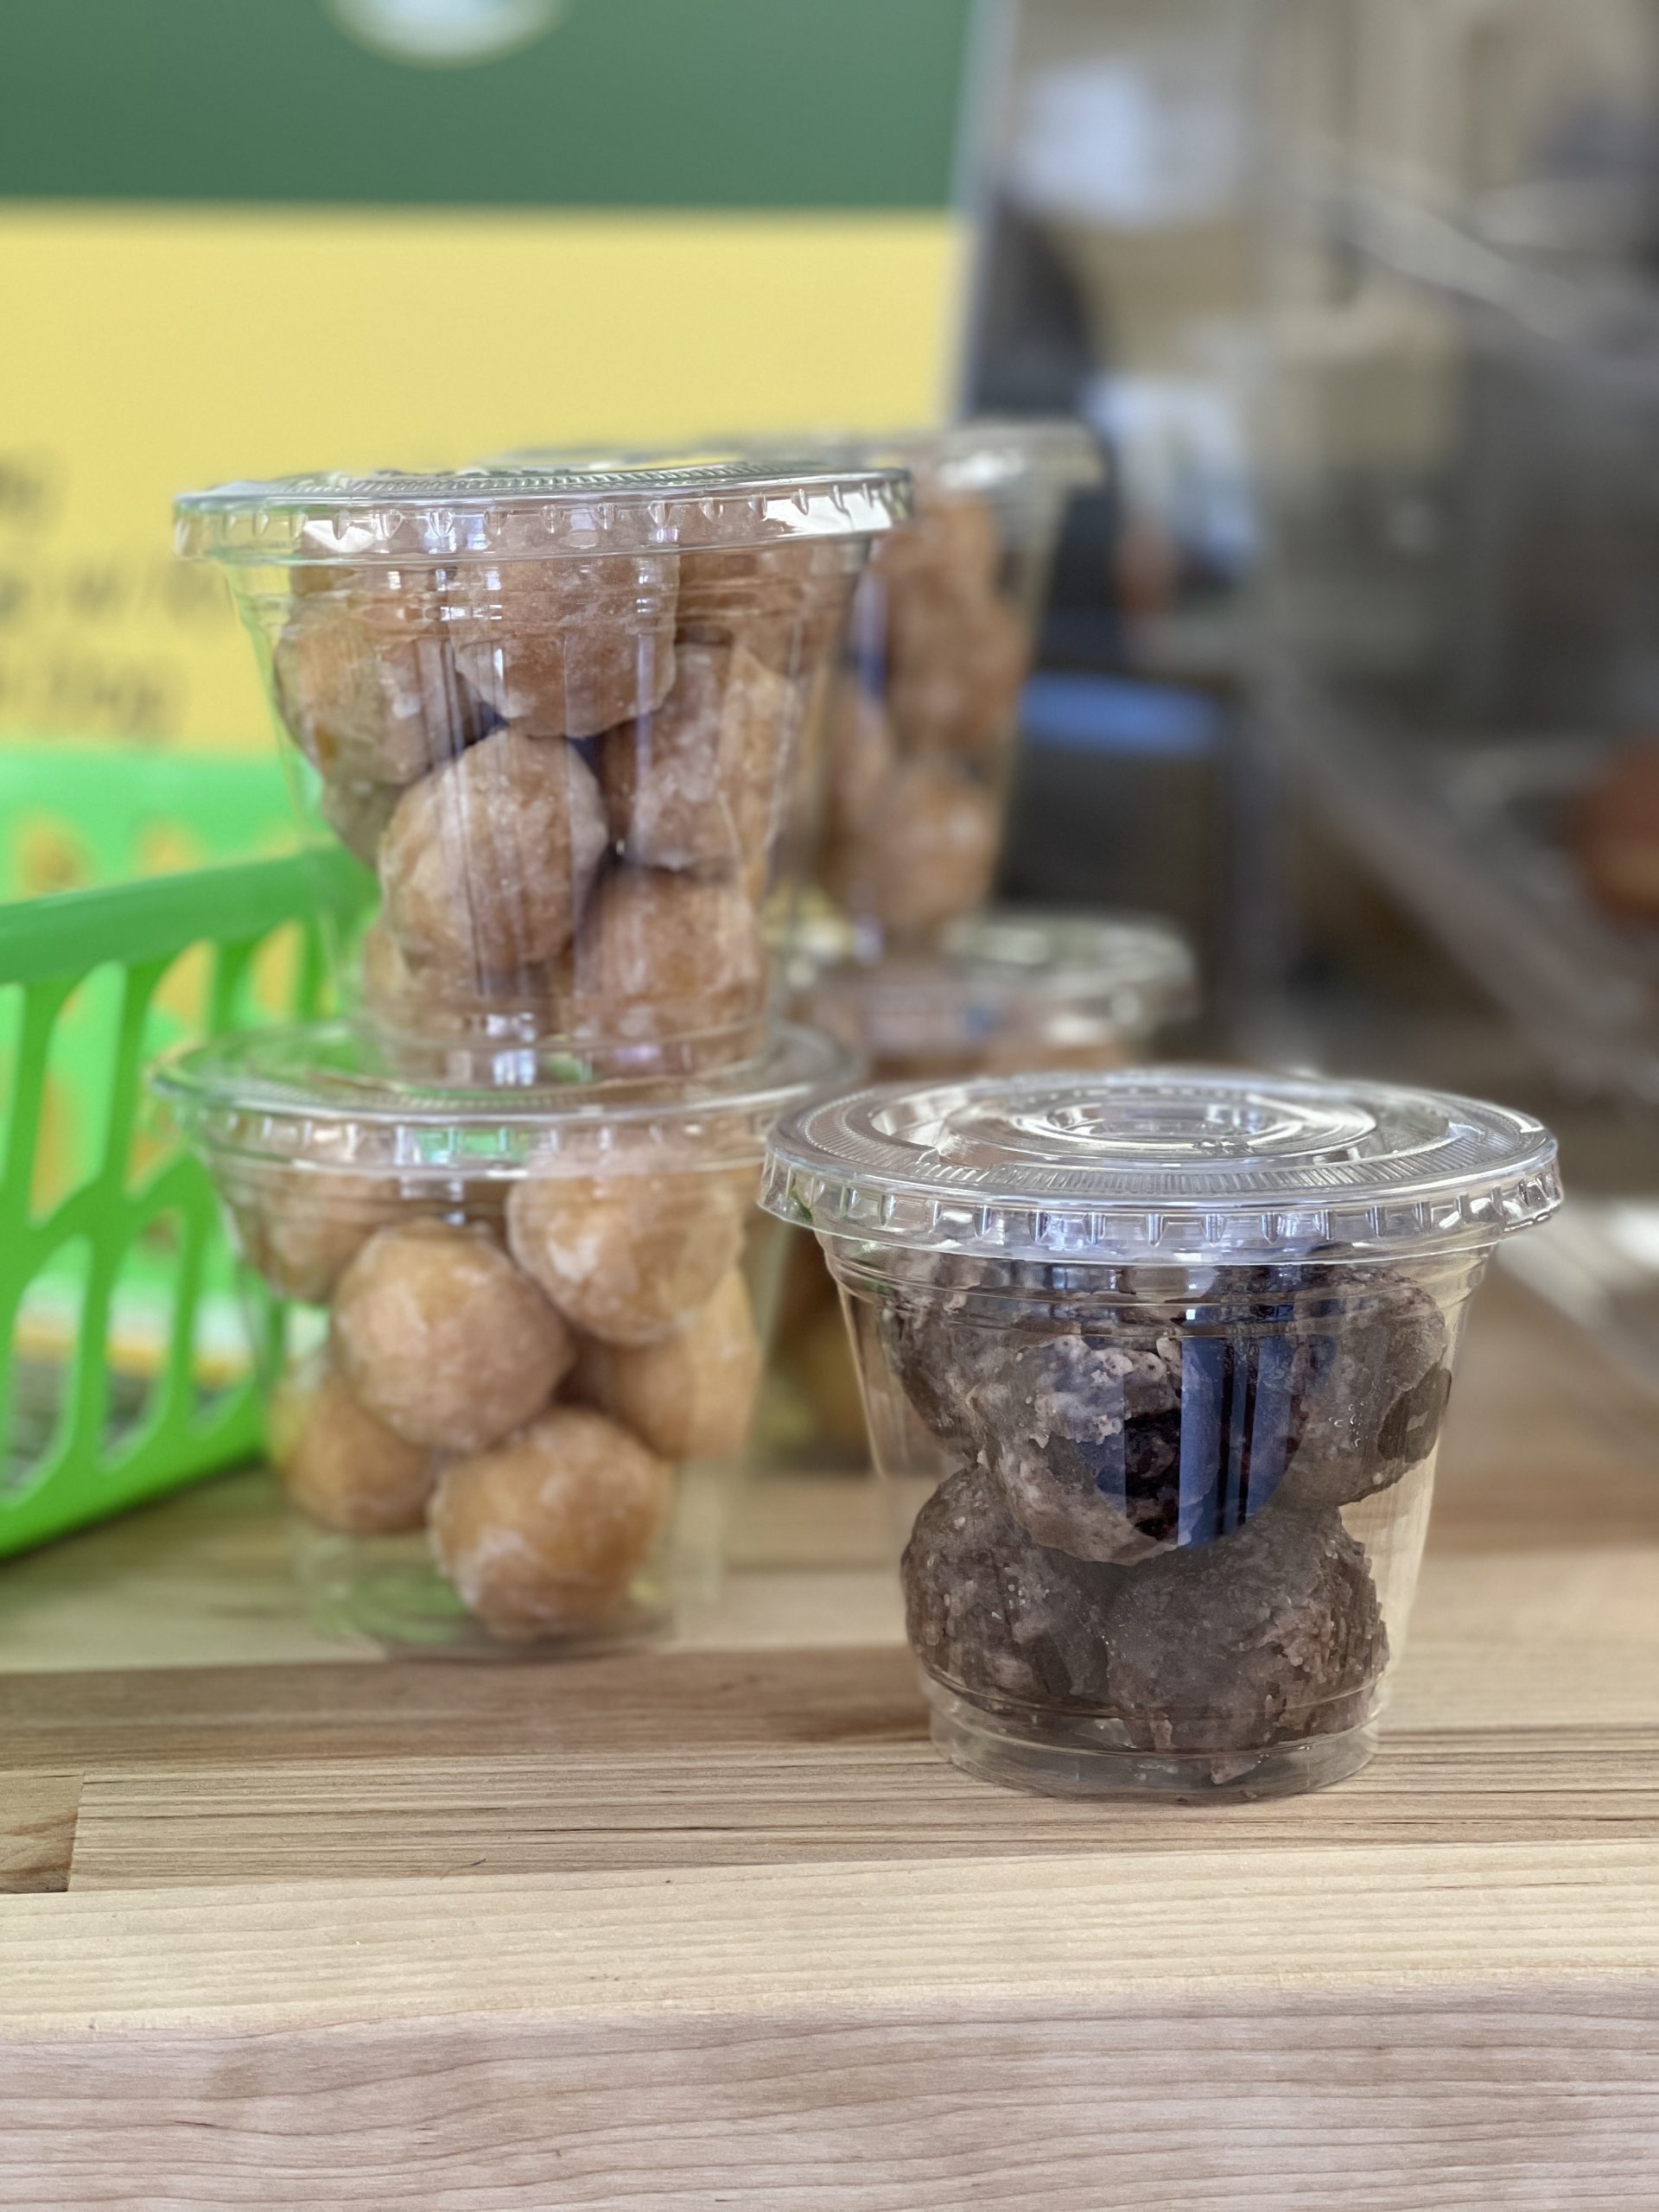 McCoy’s Coffee & Cereal Bar in North Wildwood NJ gluten free donut holes